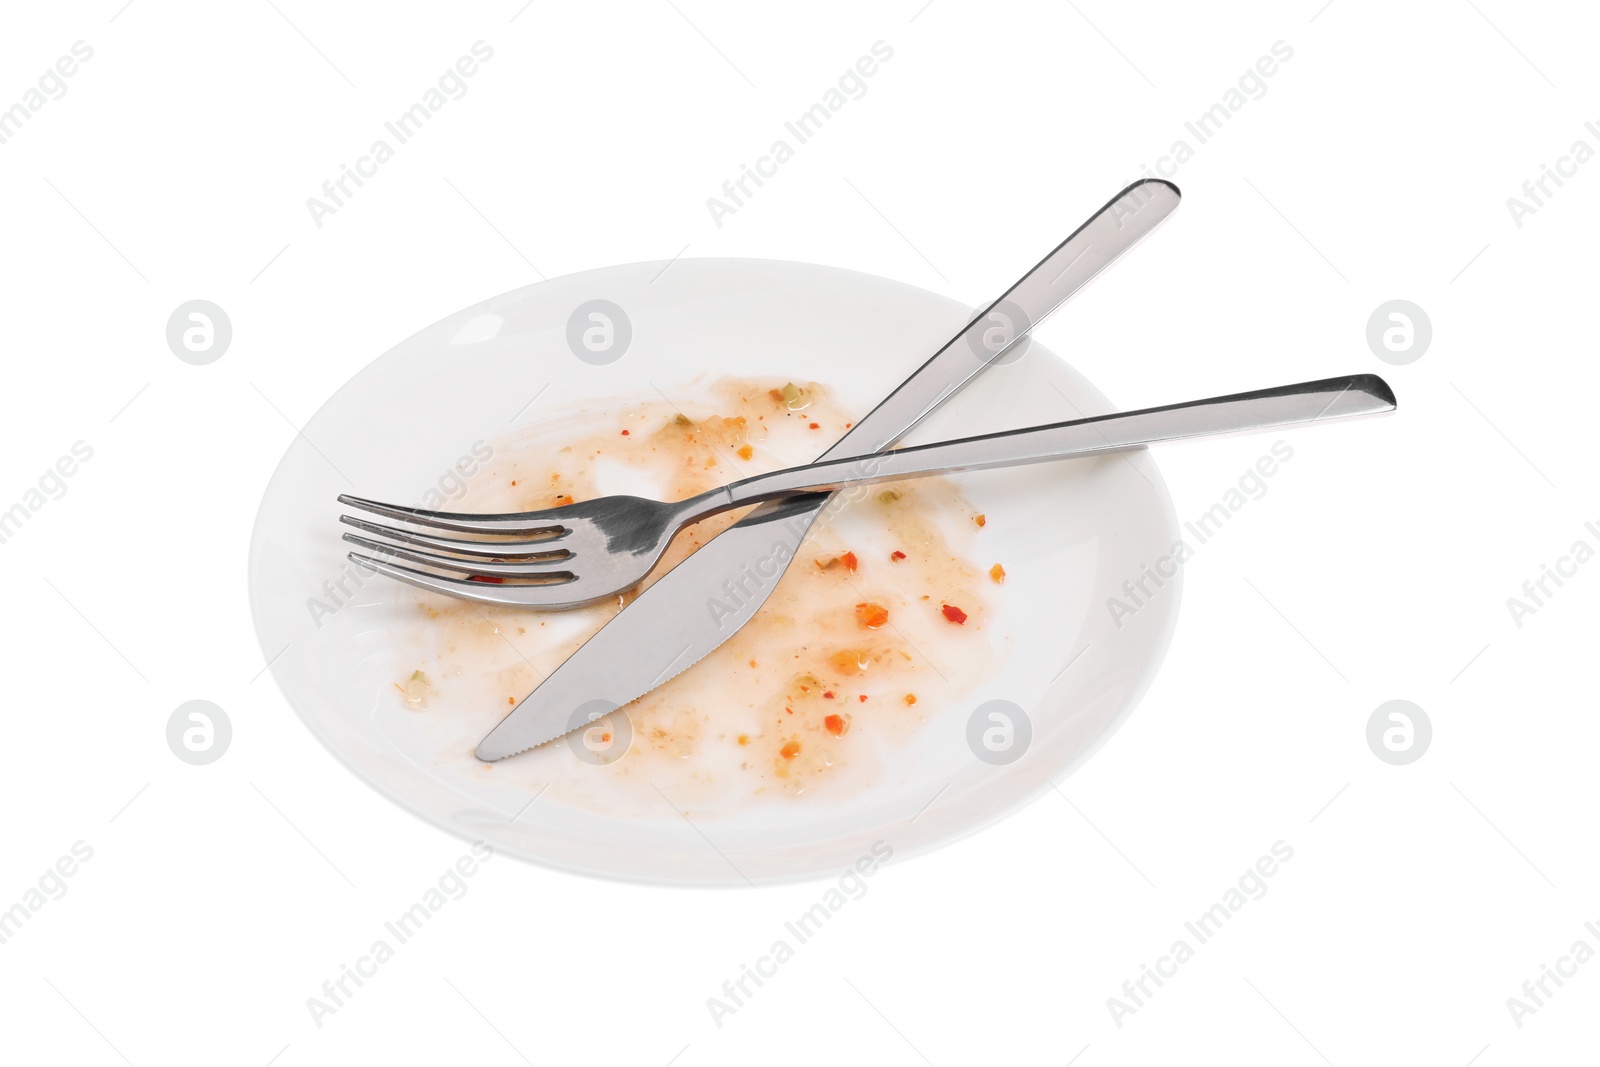 Photo of Dirty plate and cutlery on white background